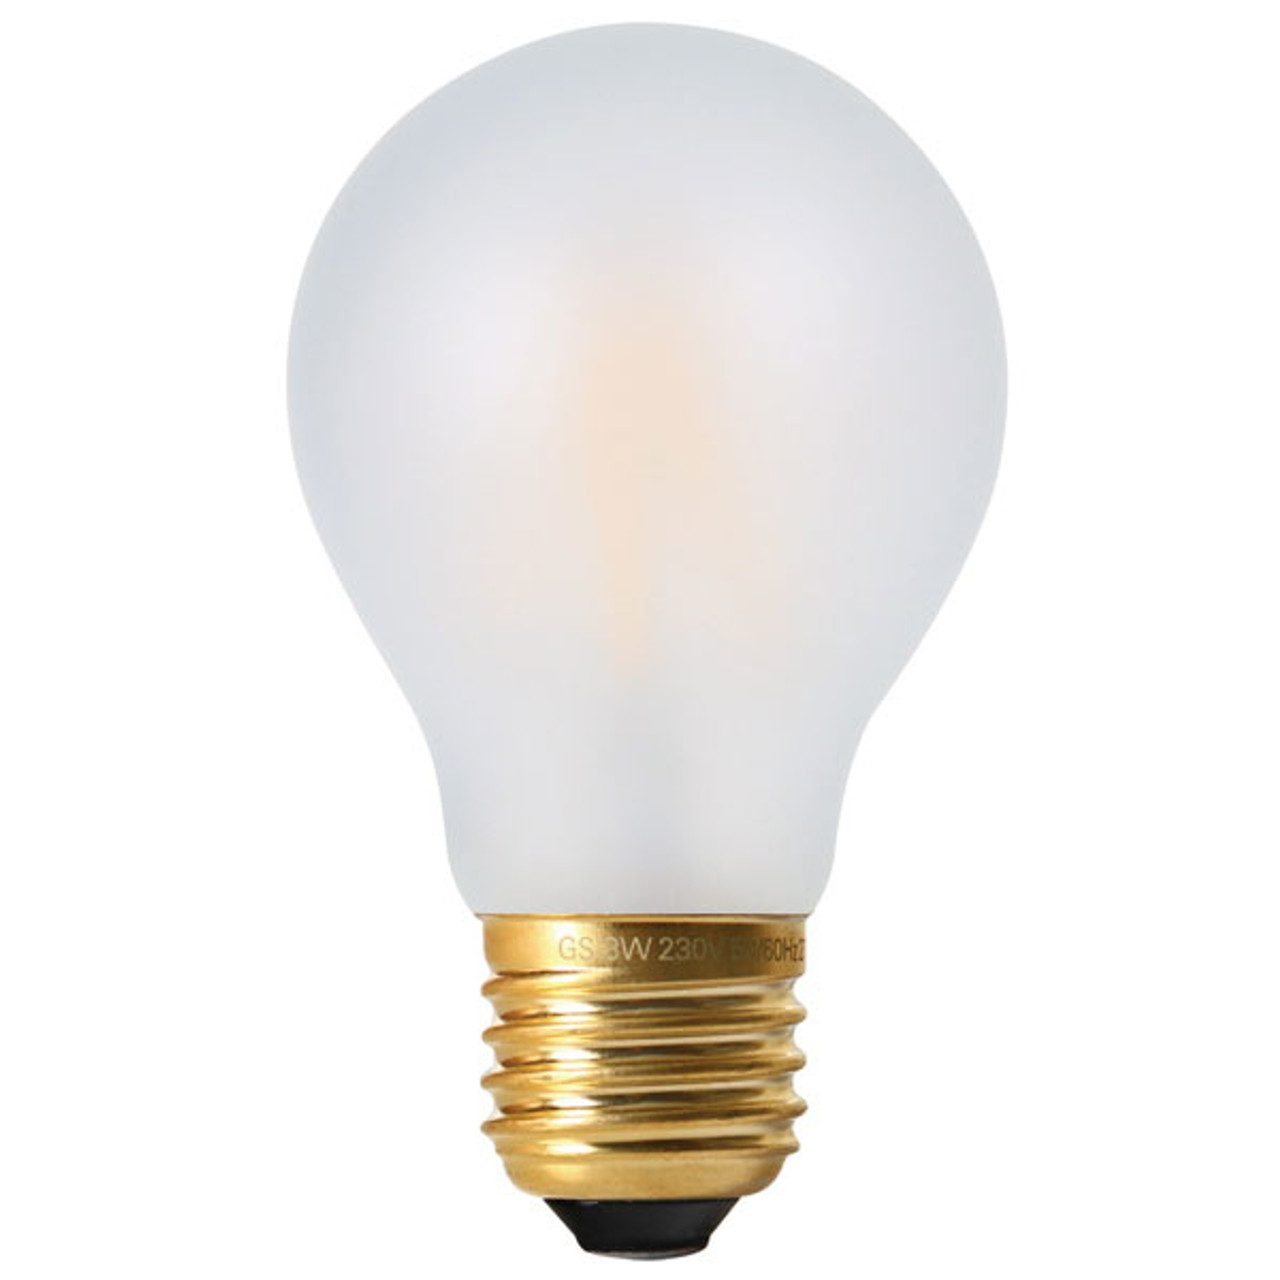 Girard Sudron LED Filament GLS 8W 240V E27 Frosted Very Warm White Dimmable